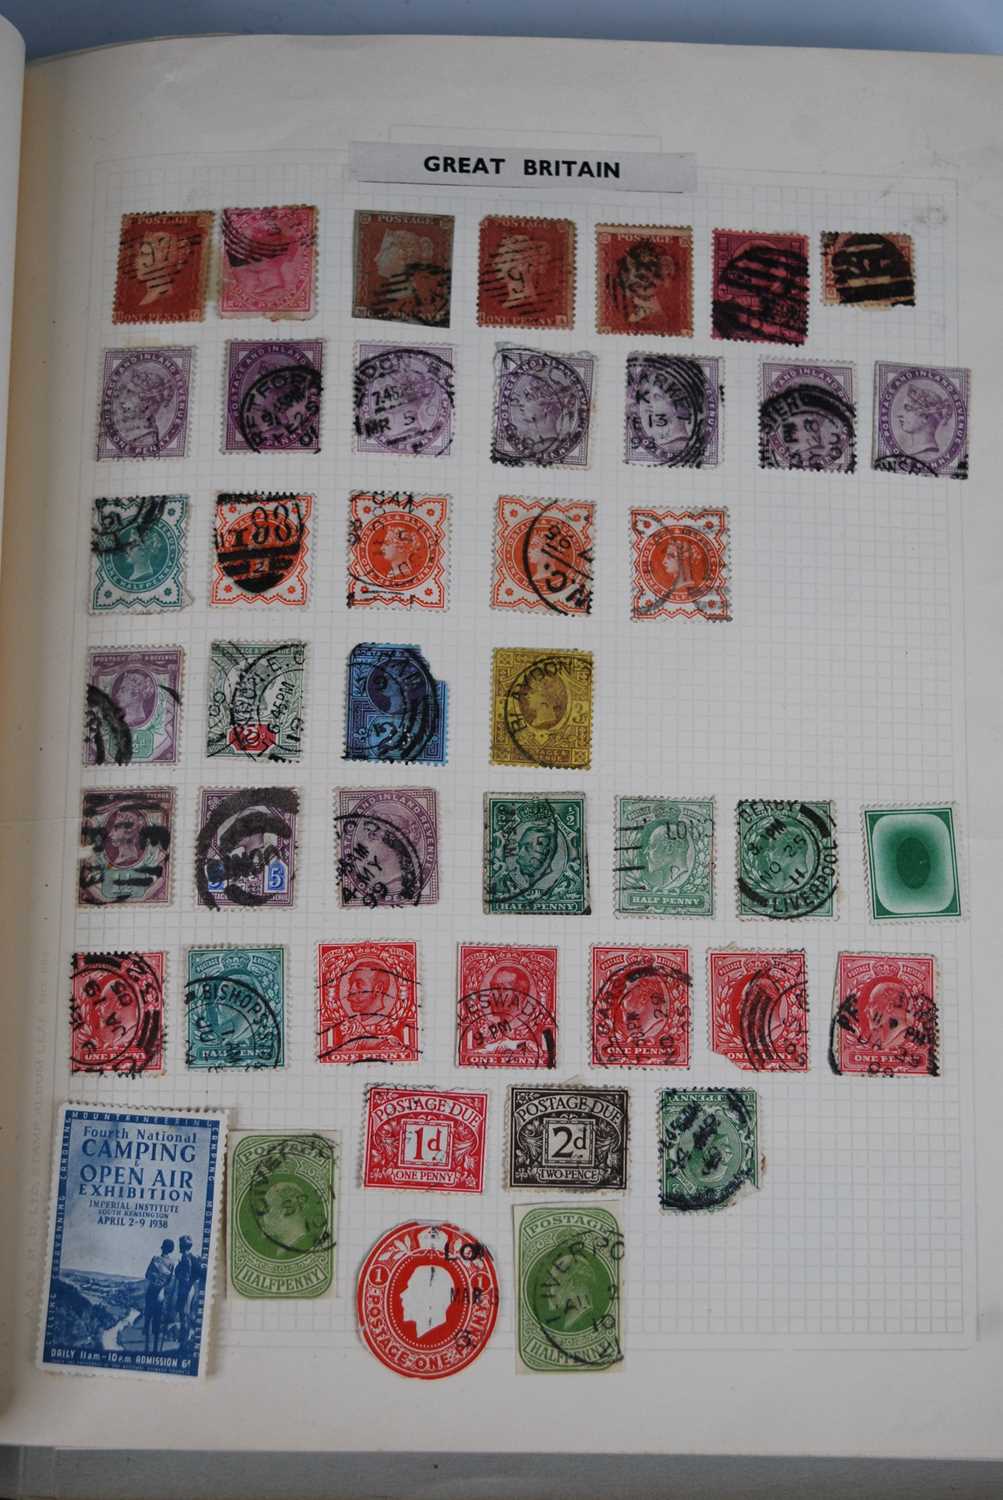 An album of stamps, contents to include GB 1d reds, 1d lilacs, 1935 silver jubilee 1/2d - 2 1/2d